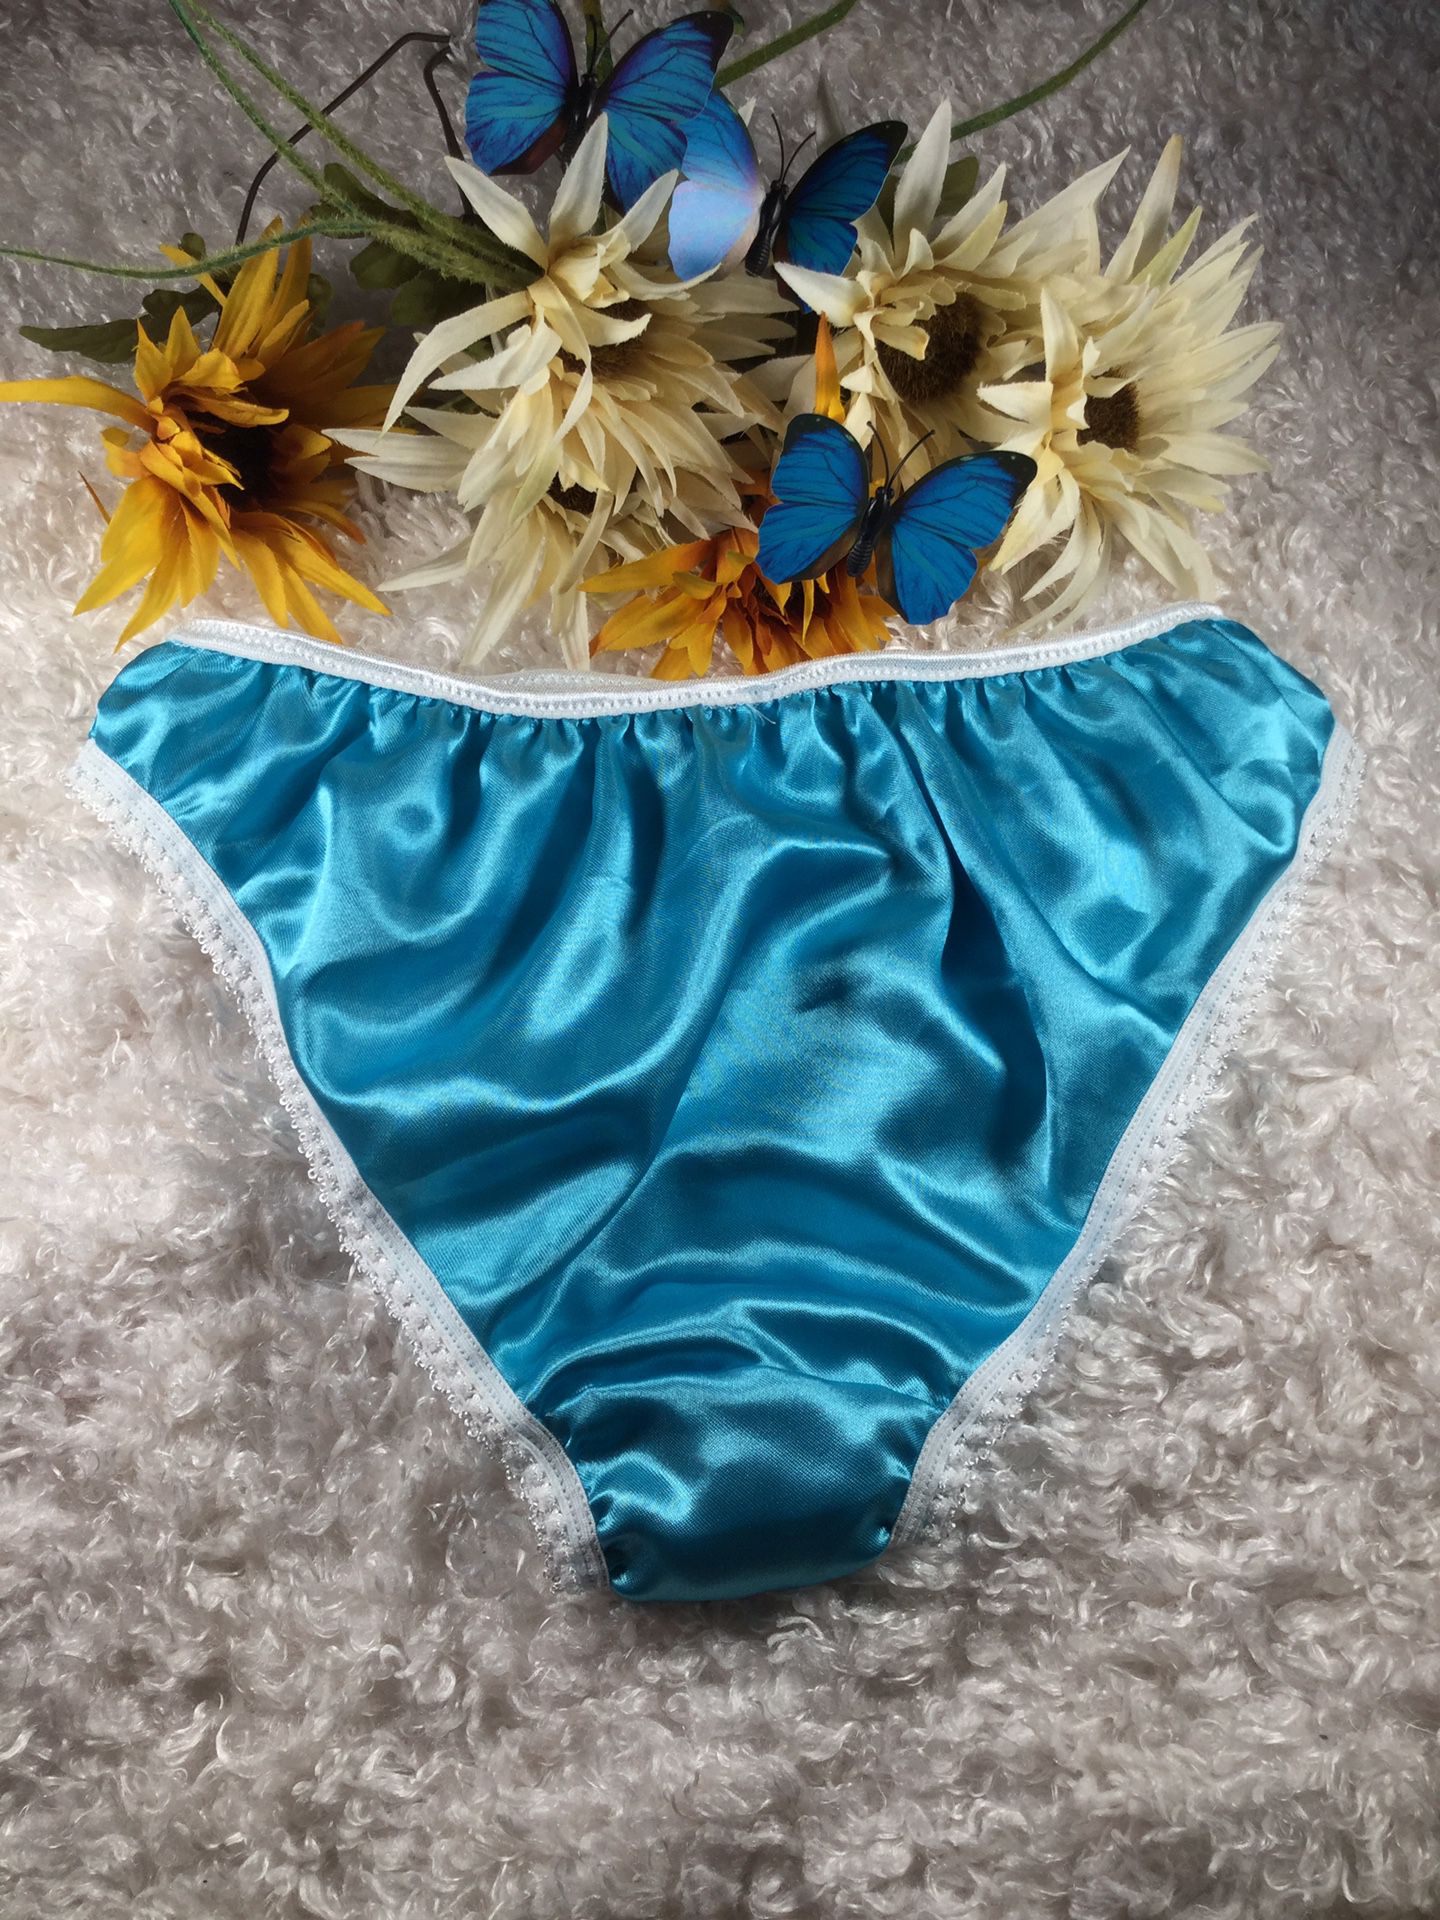 Silky satin blue lingerie panties for Sale in Montpelier, OH - OfferUp